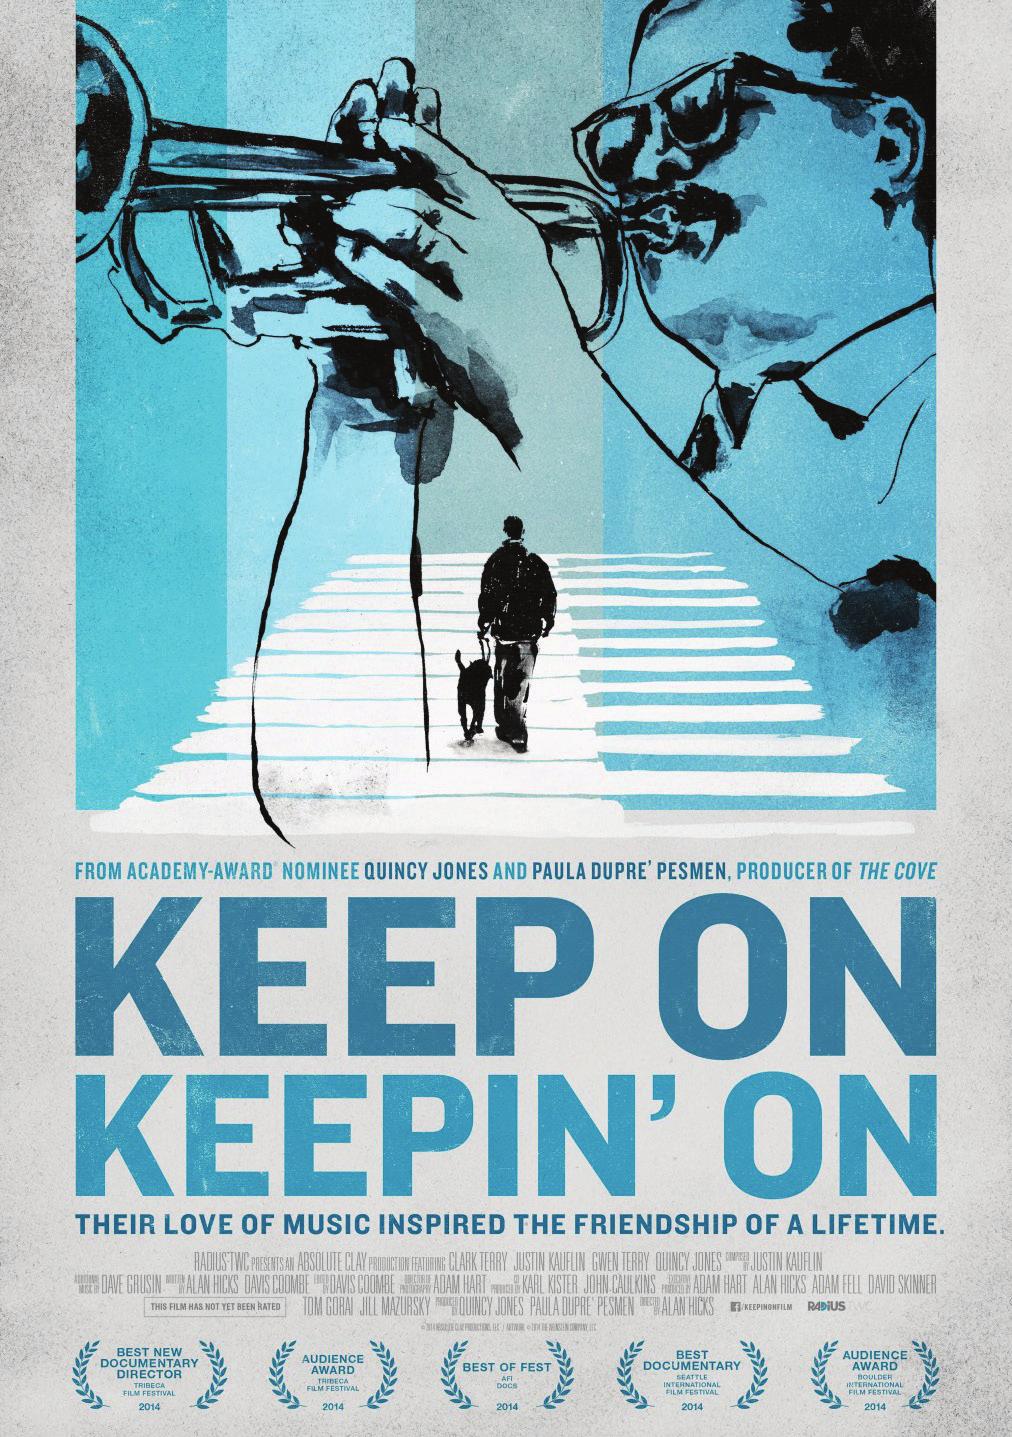 Director: Alan Hicks Year: 2014 Time: 84 min You might know this director from: KEEP ON KEEPIN ON is the debut feature film from this director.